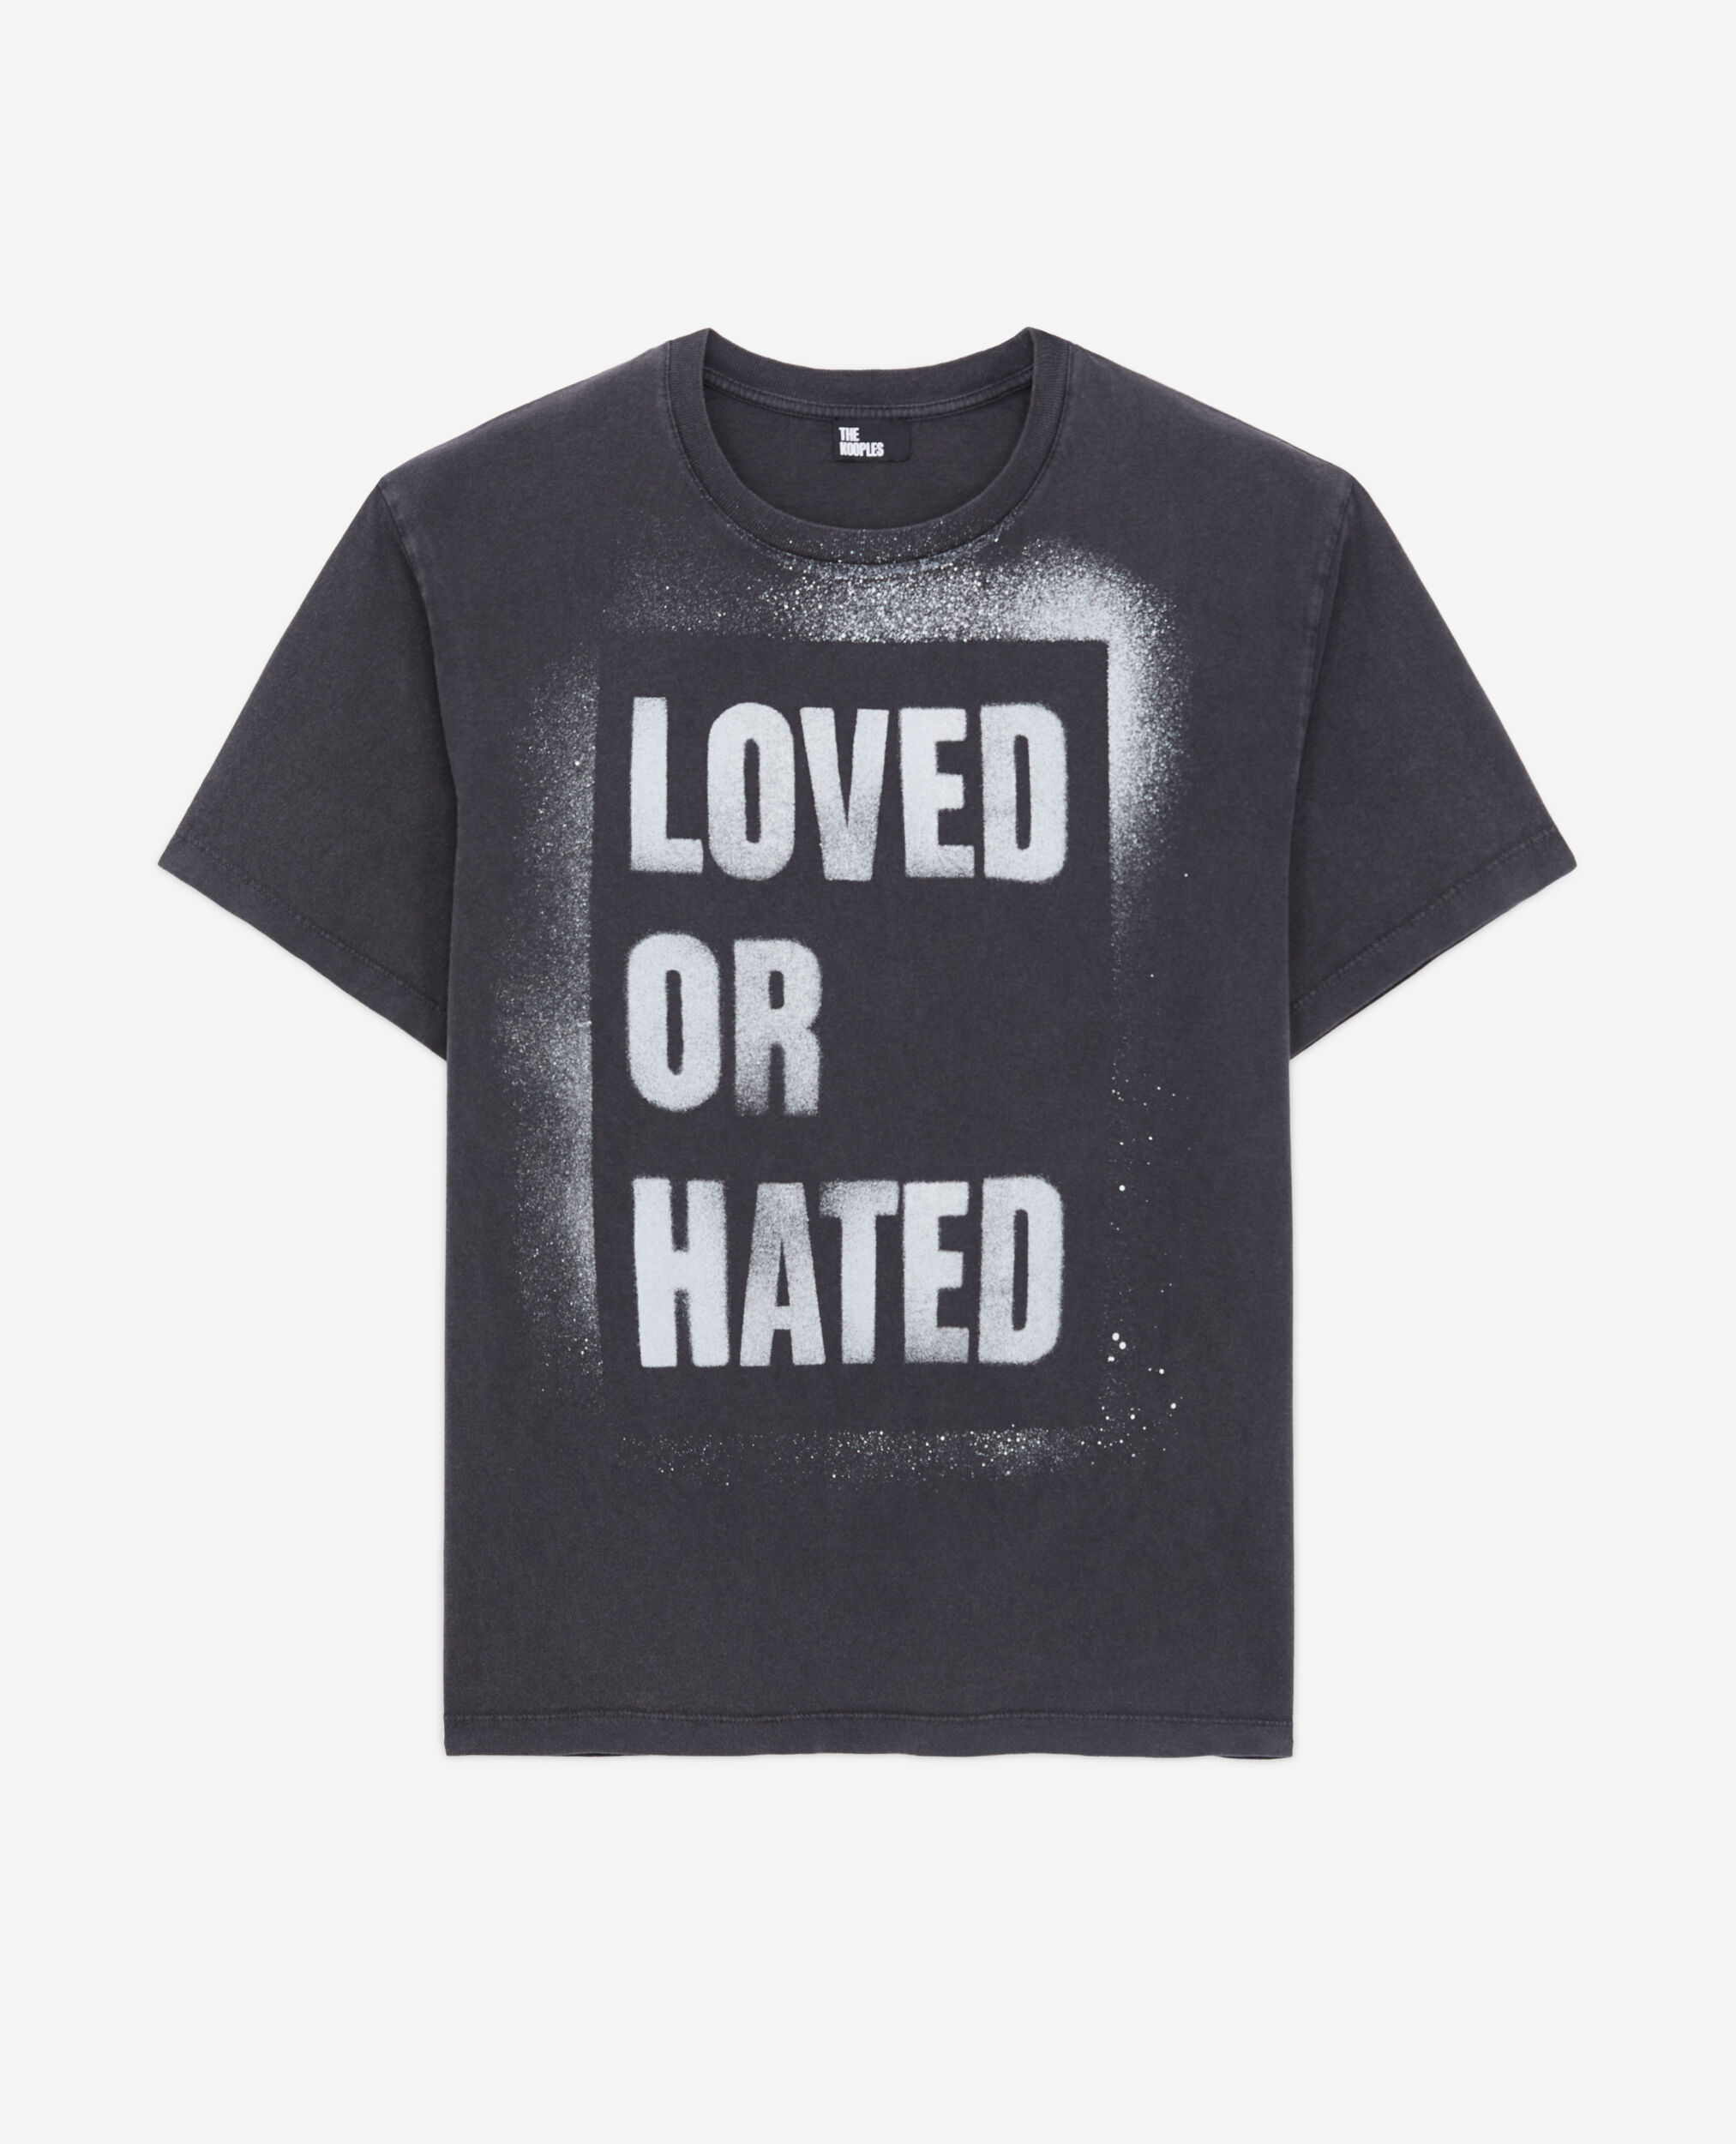 Women's black t-shirt with loved or hated serigraphy, BLACK WASHED, hi-res image number null